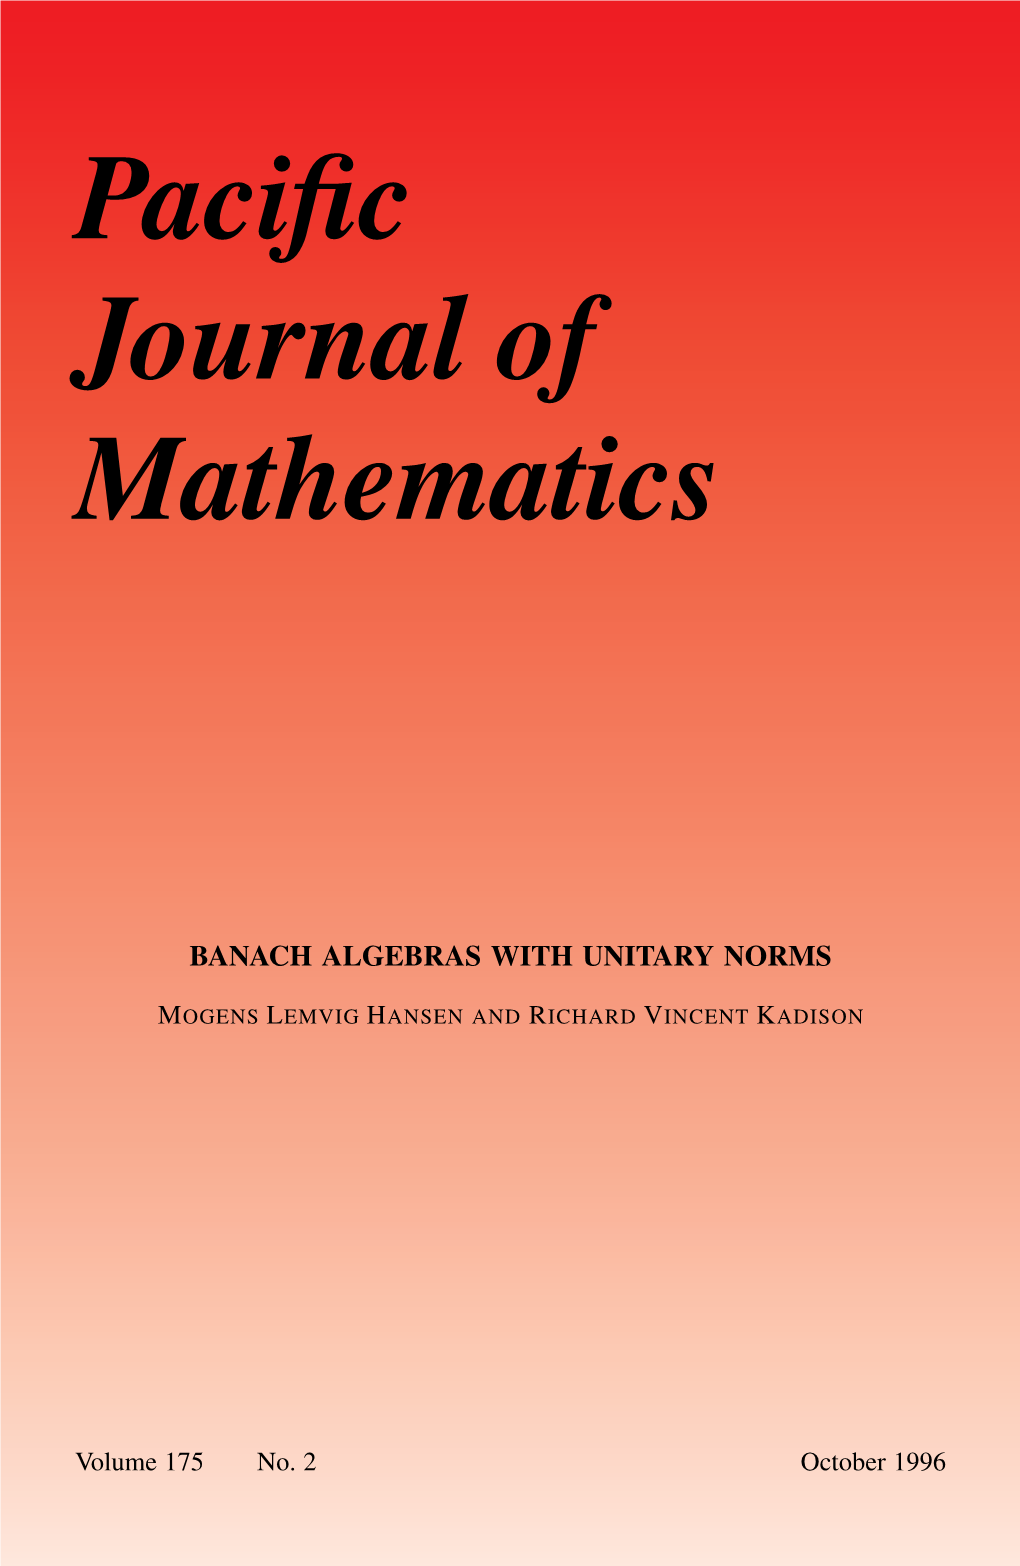 Banach Algebras with Unitary Norms